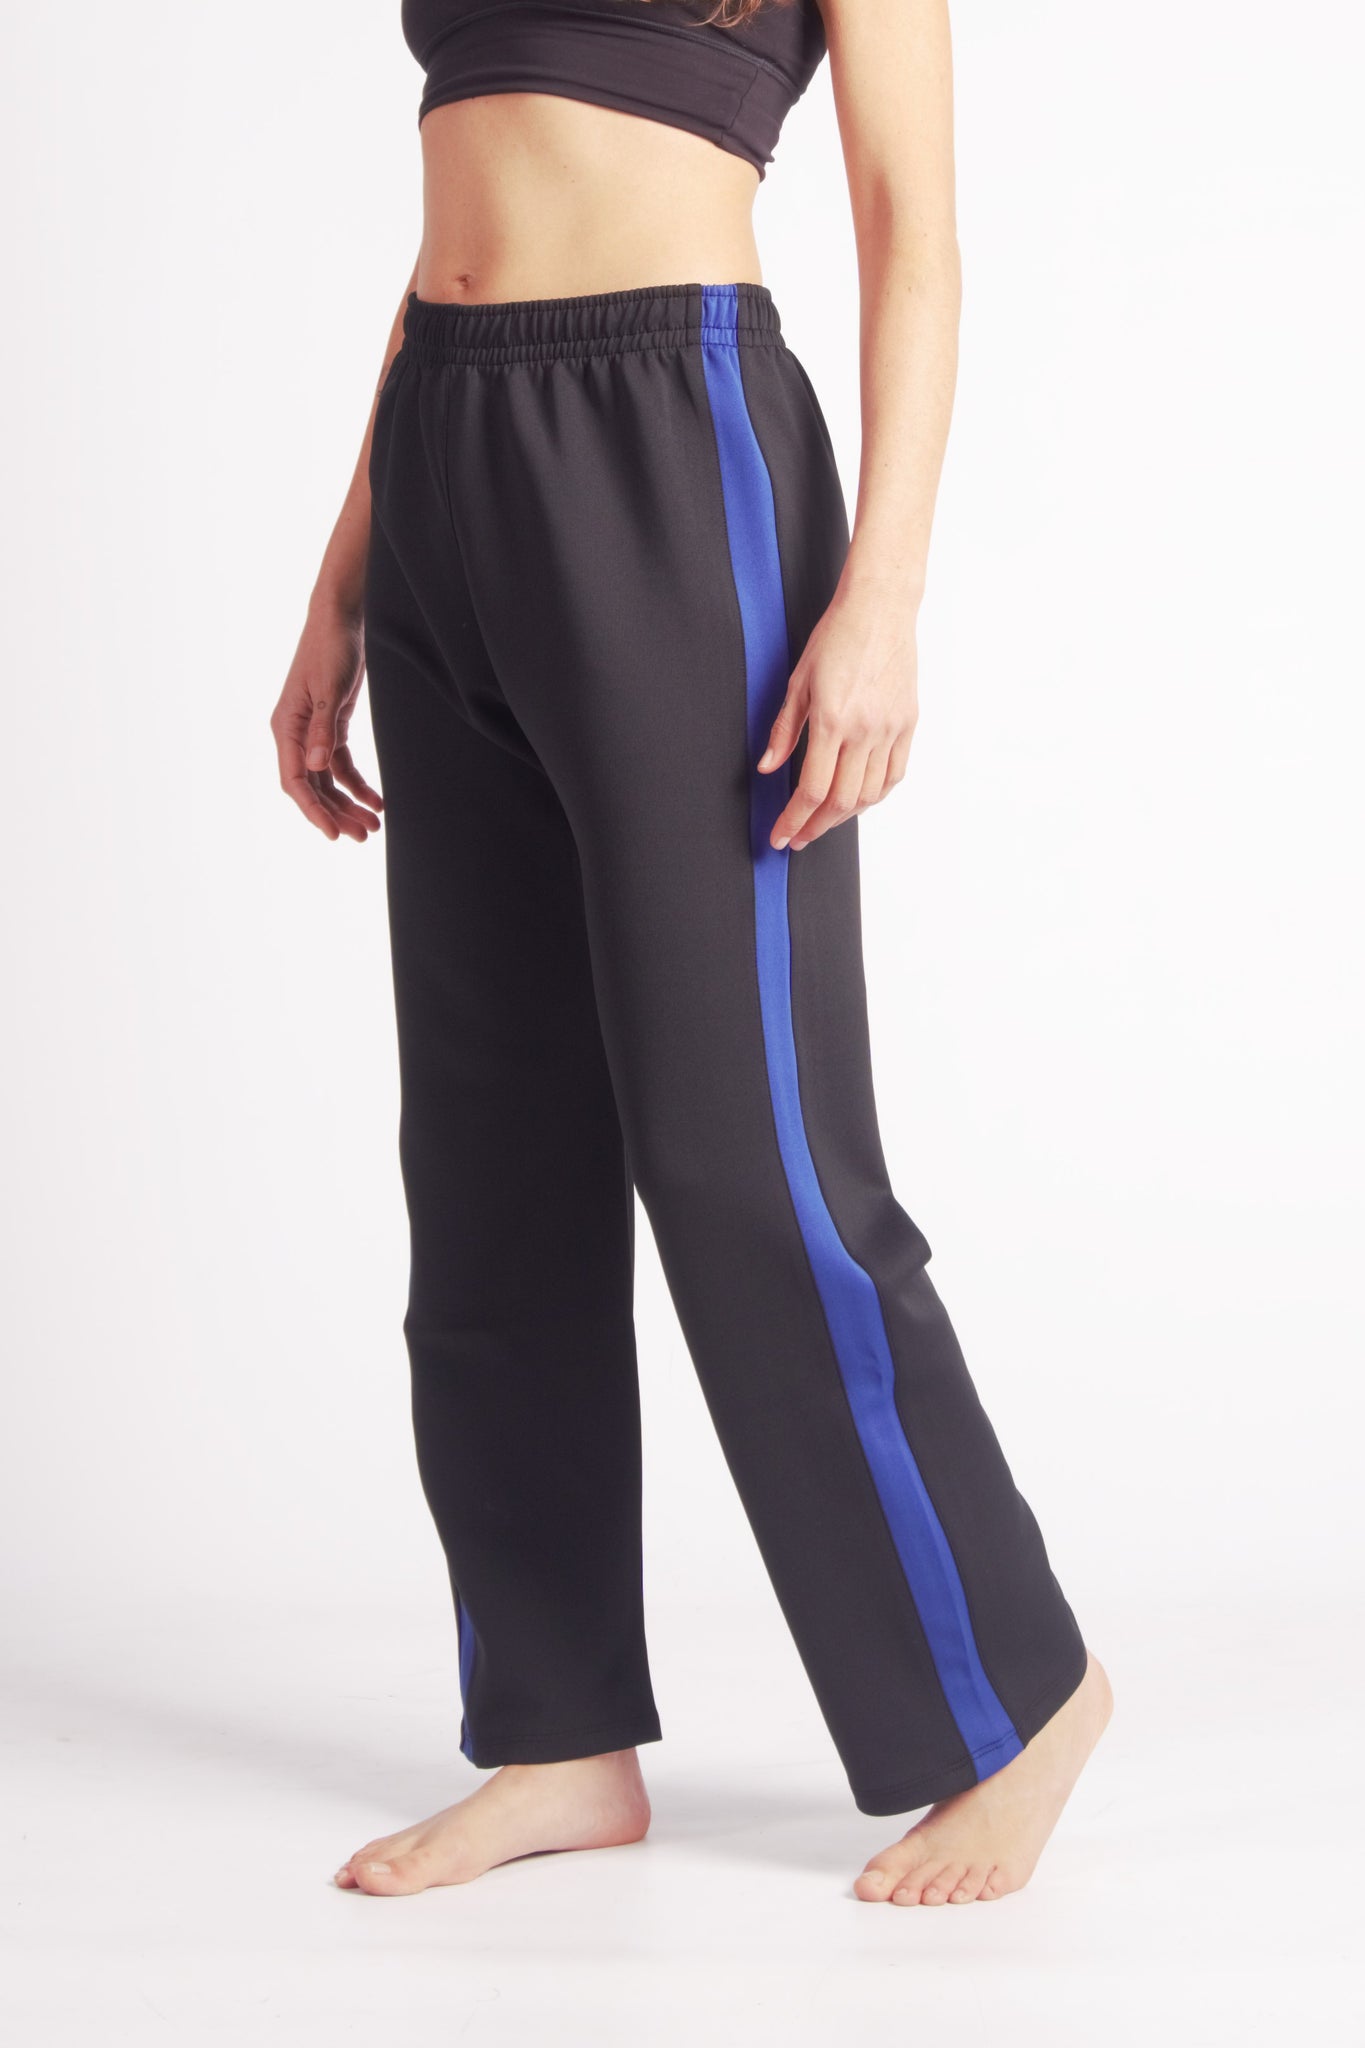 Flying Contemporary Dance Pants - E Motion Bodies Brand